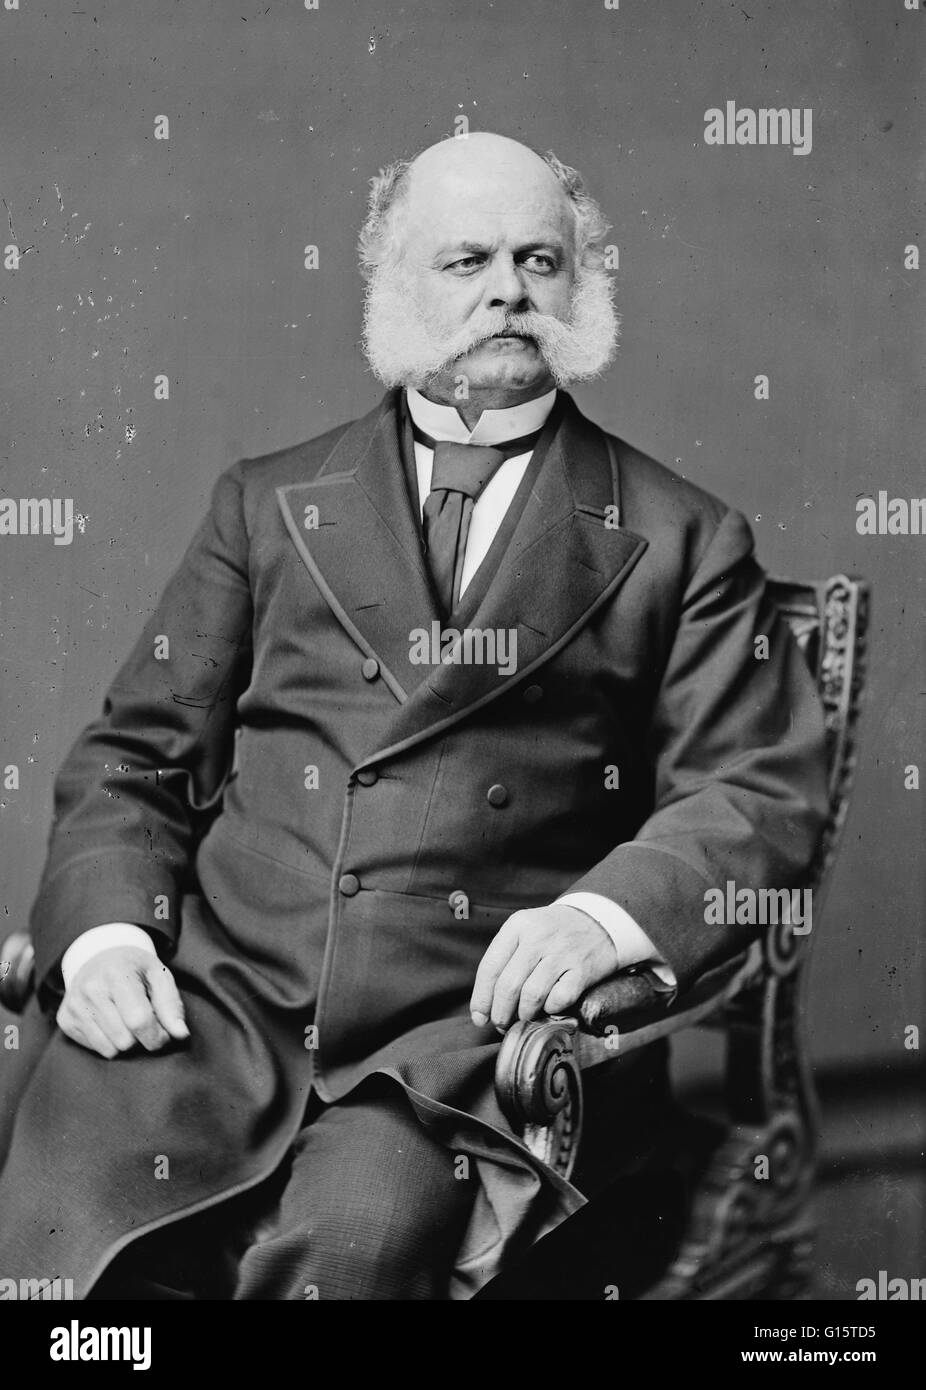 Ambrose Everett Burnside (May 23, 1824 - September 13, 1881) was an American soldier, railroad executive, inventor, industrialist, and politician from Rhode Island, serving as governor and a US Senator. As a Union Army general in the American Civil War, h Stock Photo